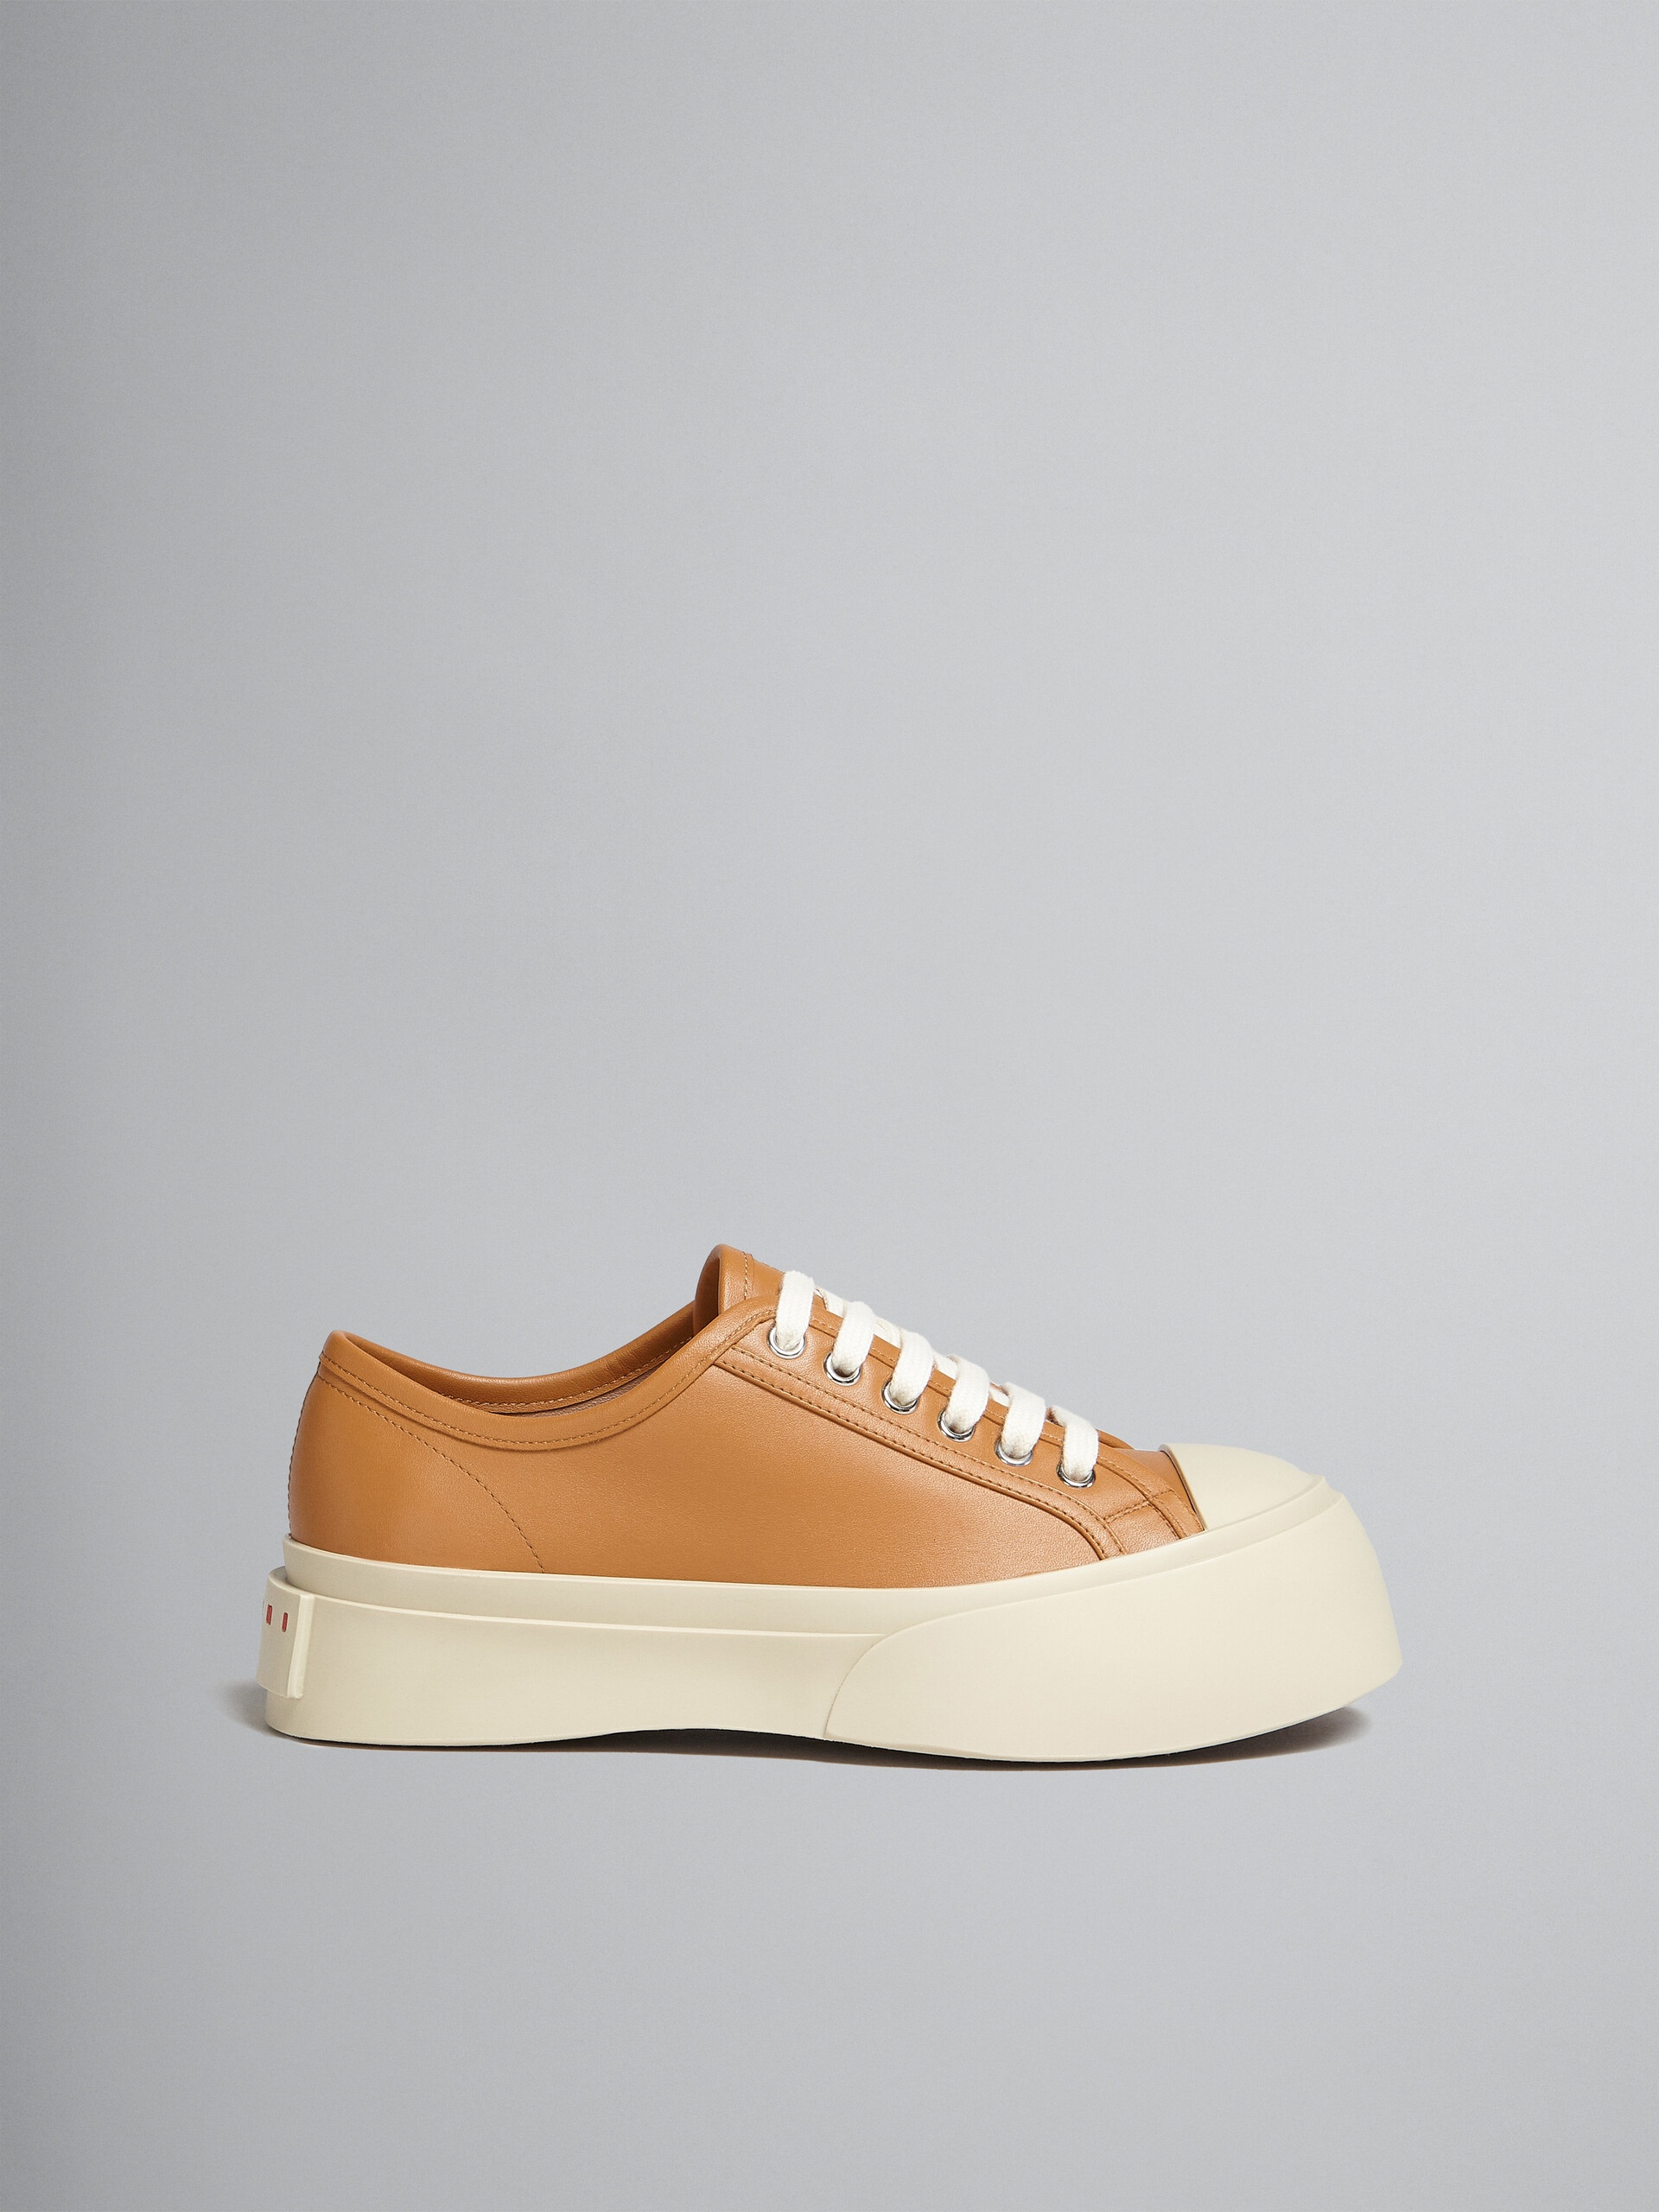 BROWN NAPPA LEATHER PABLO LACE-UP SNEAKER - 1